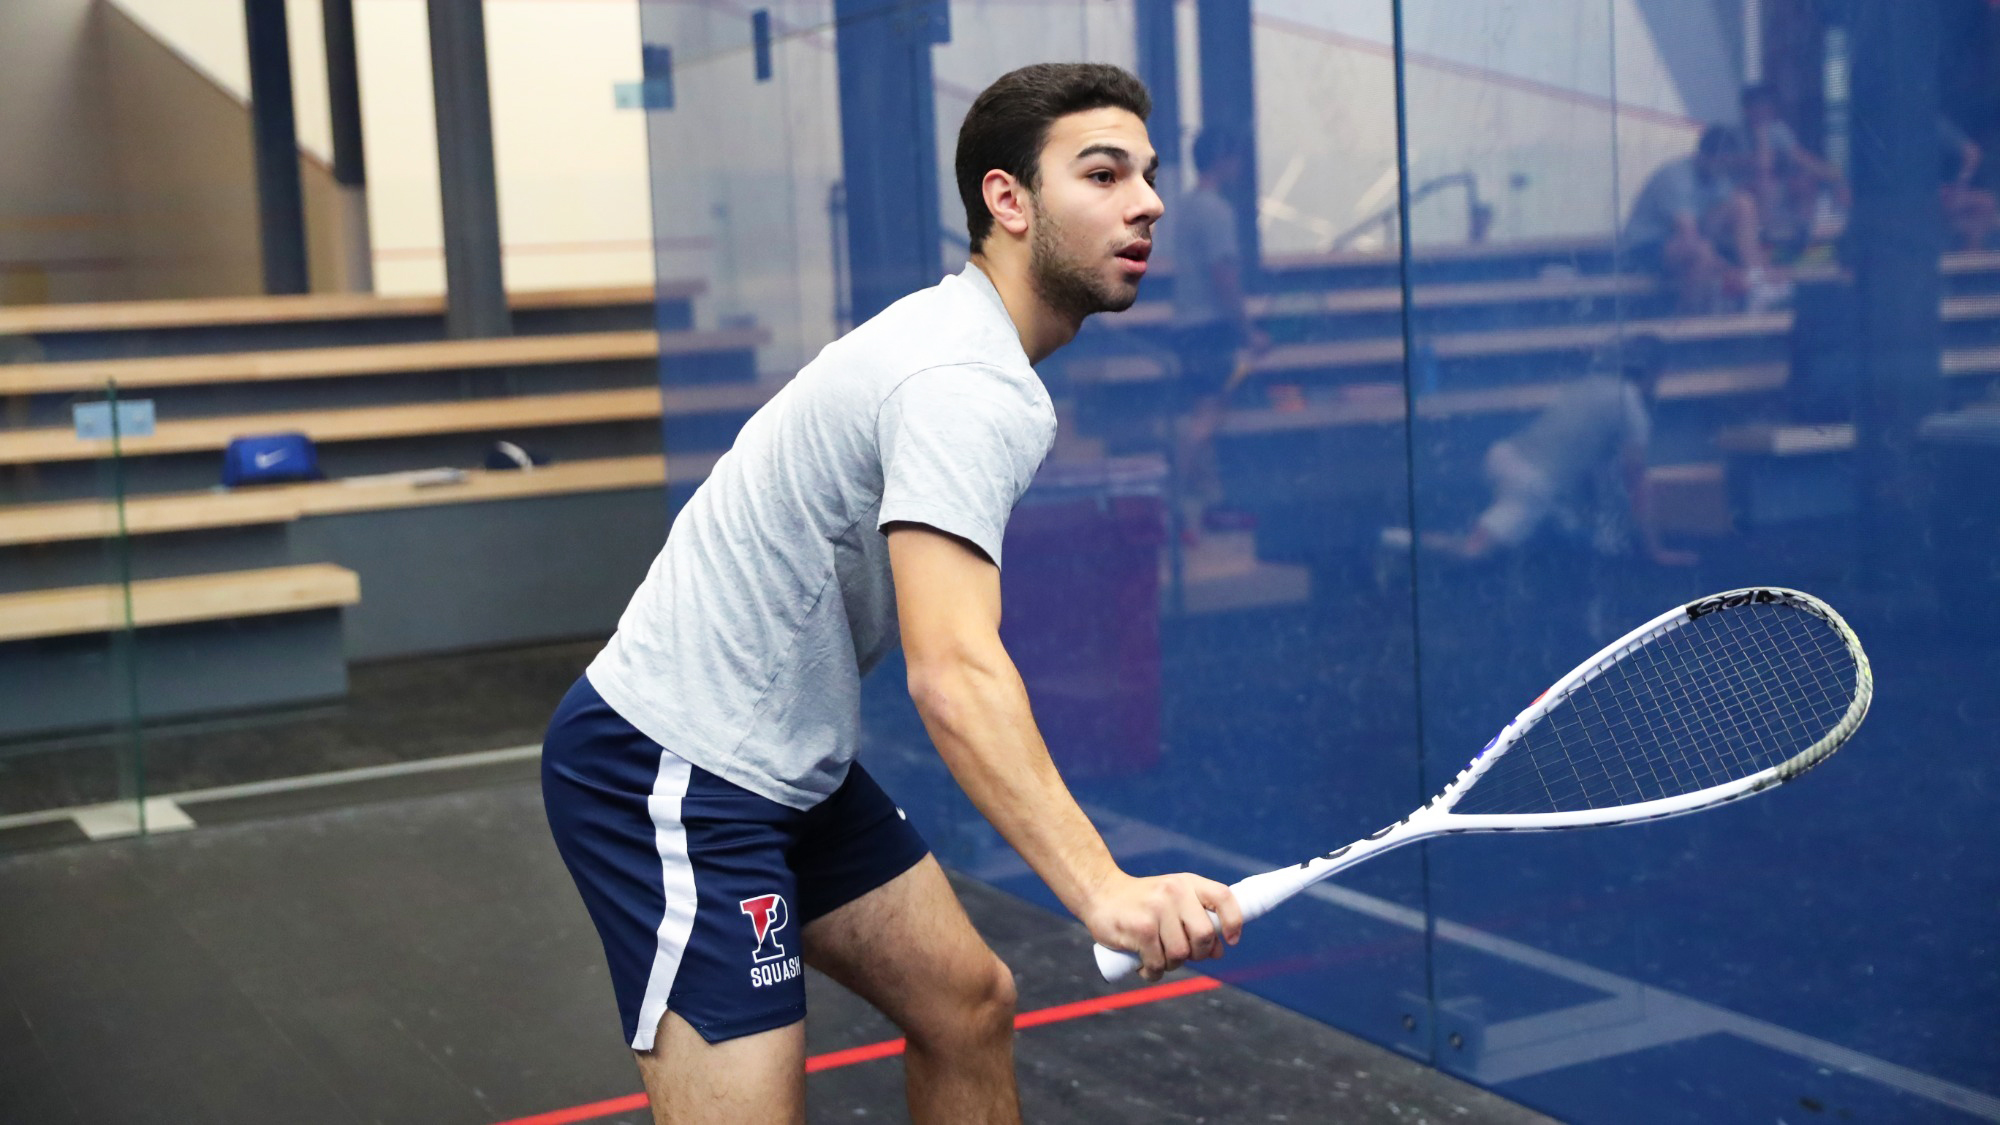 Hafez in a squash court with a racquet in his hands ready for a shot.